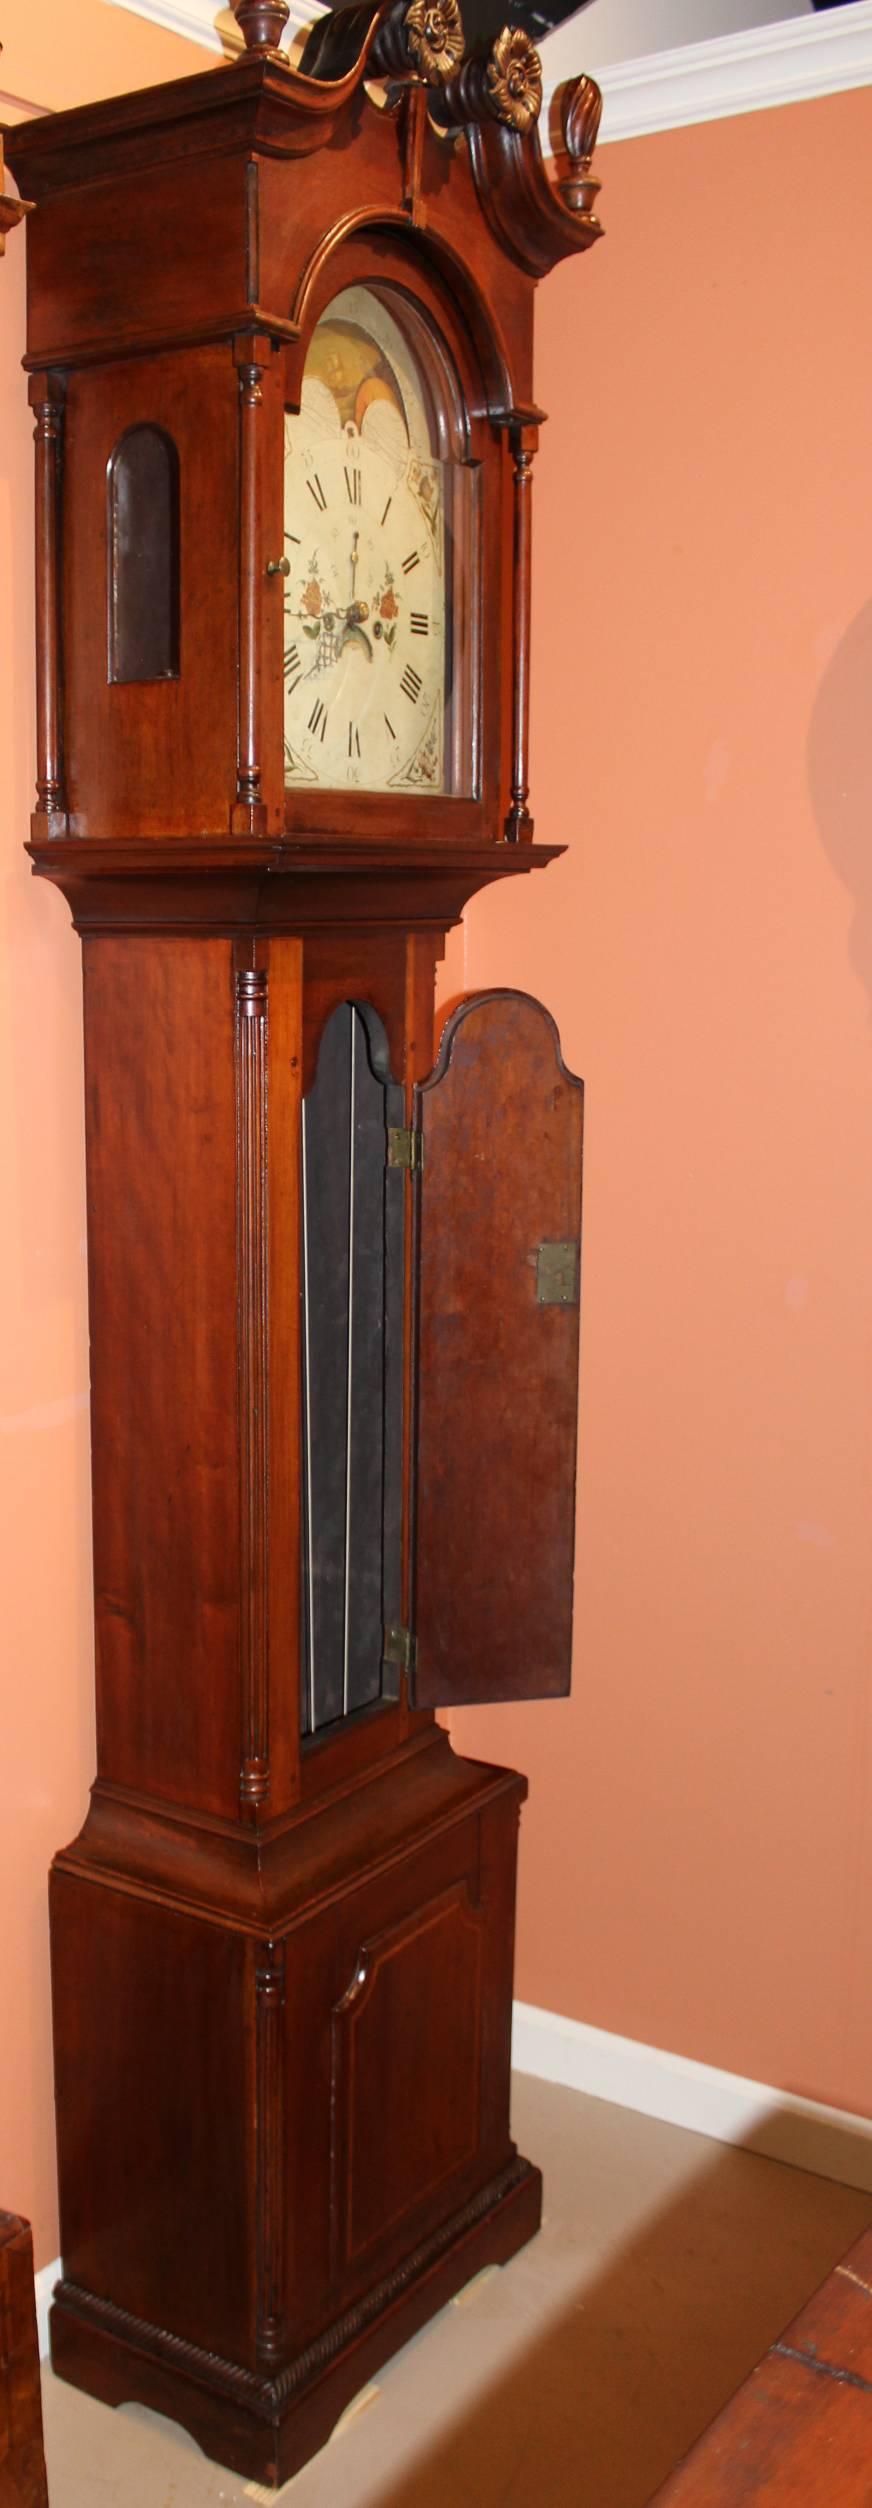 American 18th Century Pennsylvania Cherry Tall Case Clock with Moon Phase